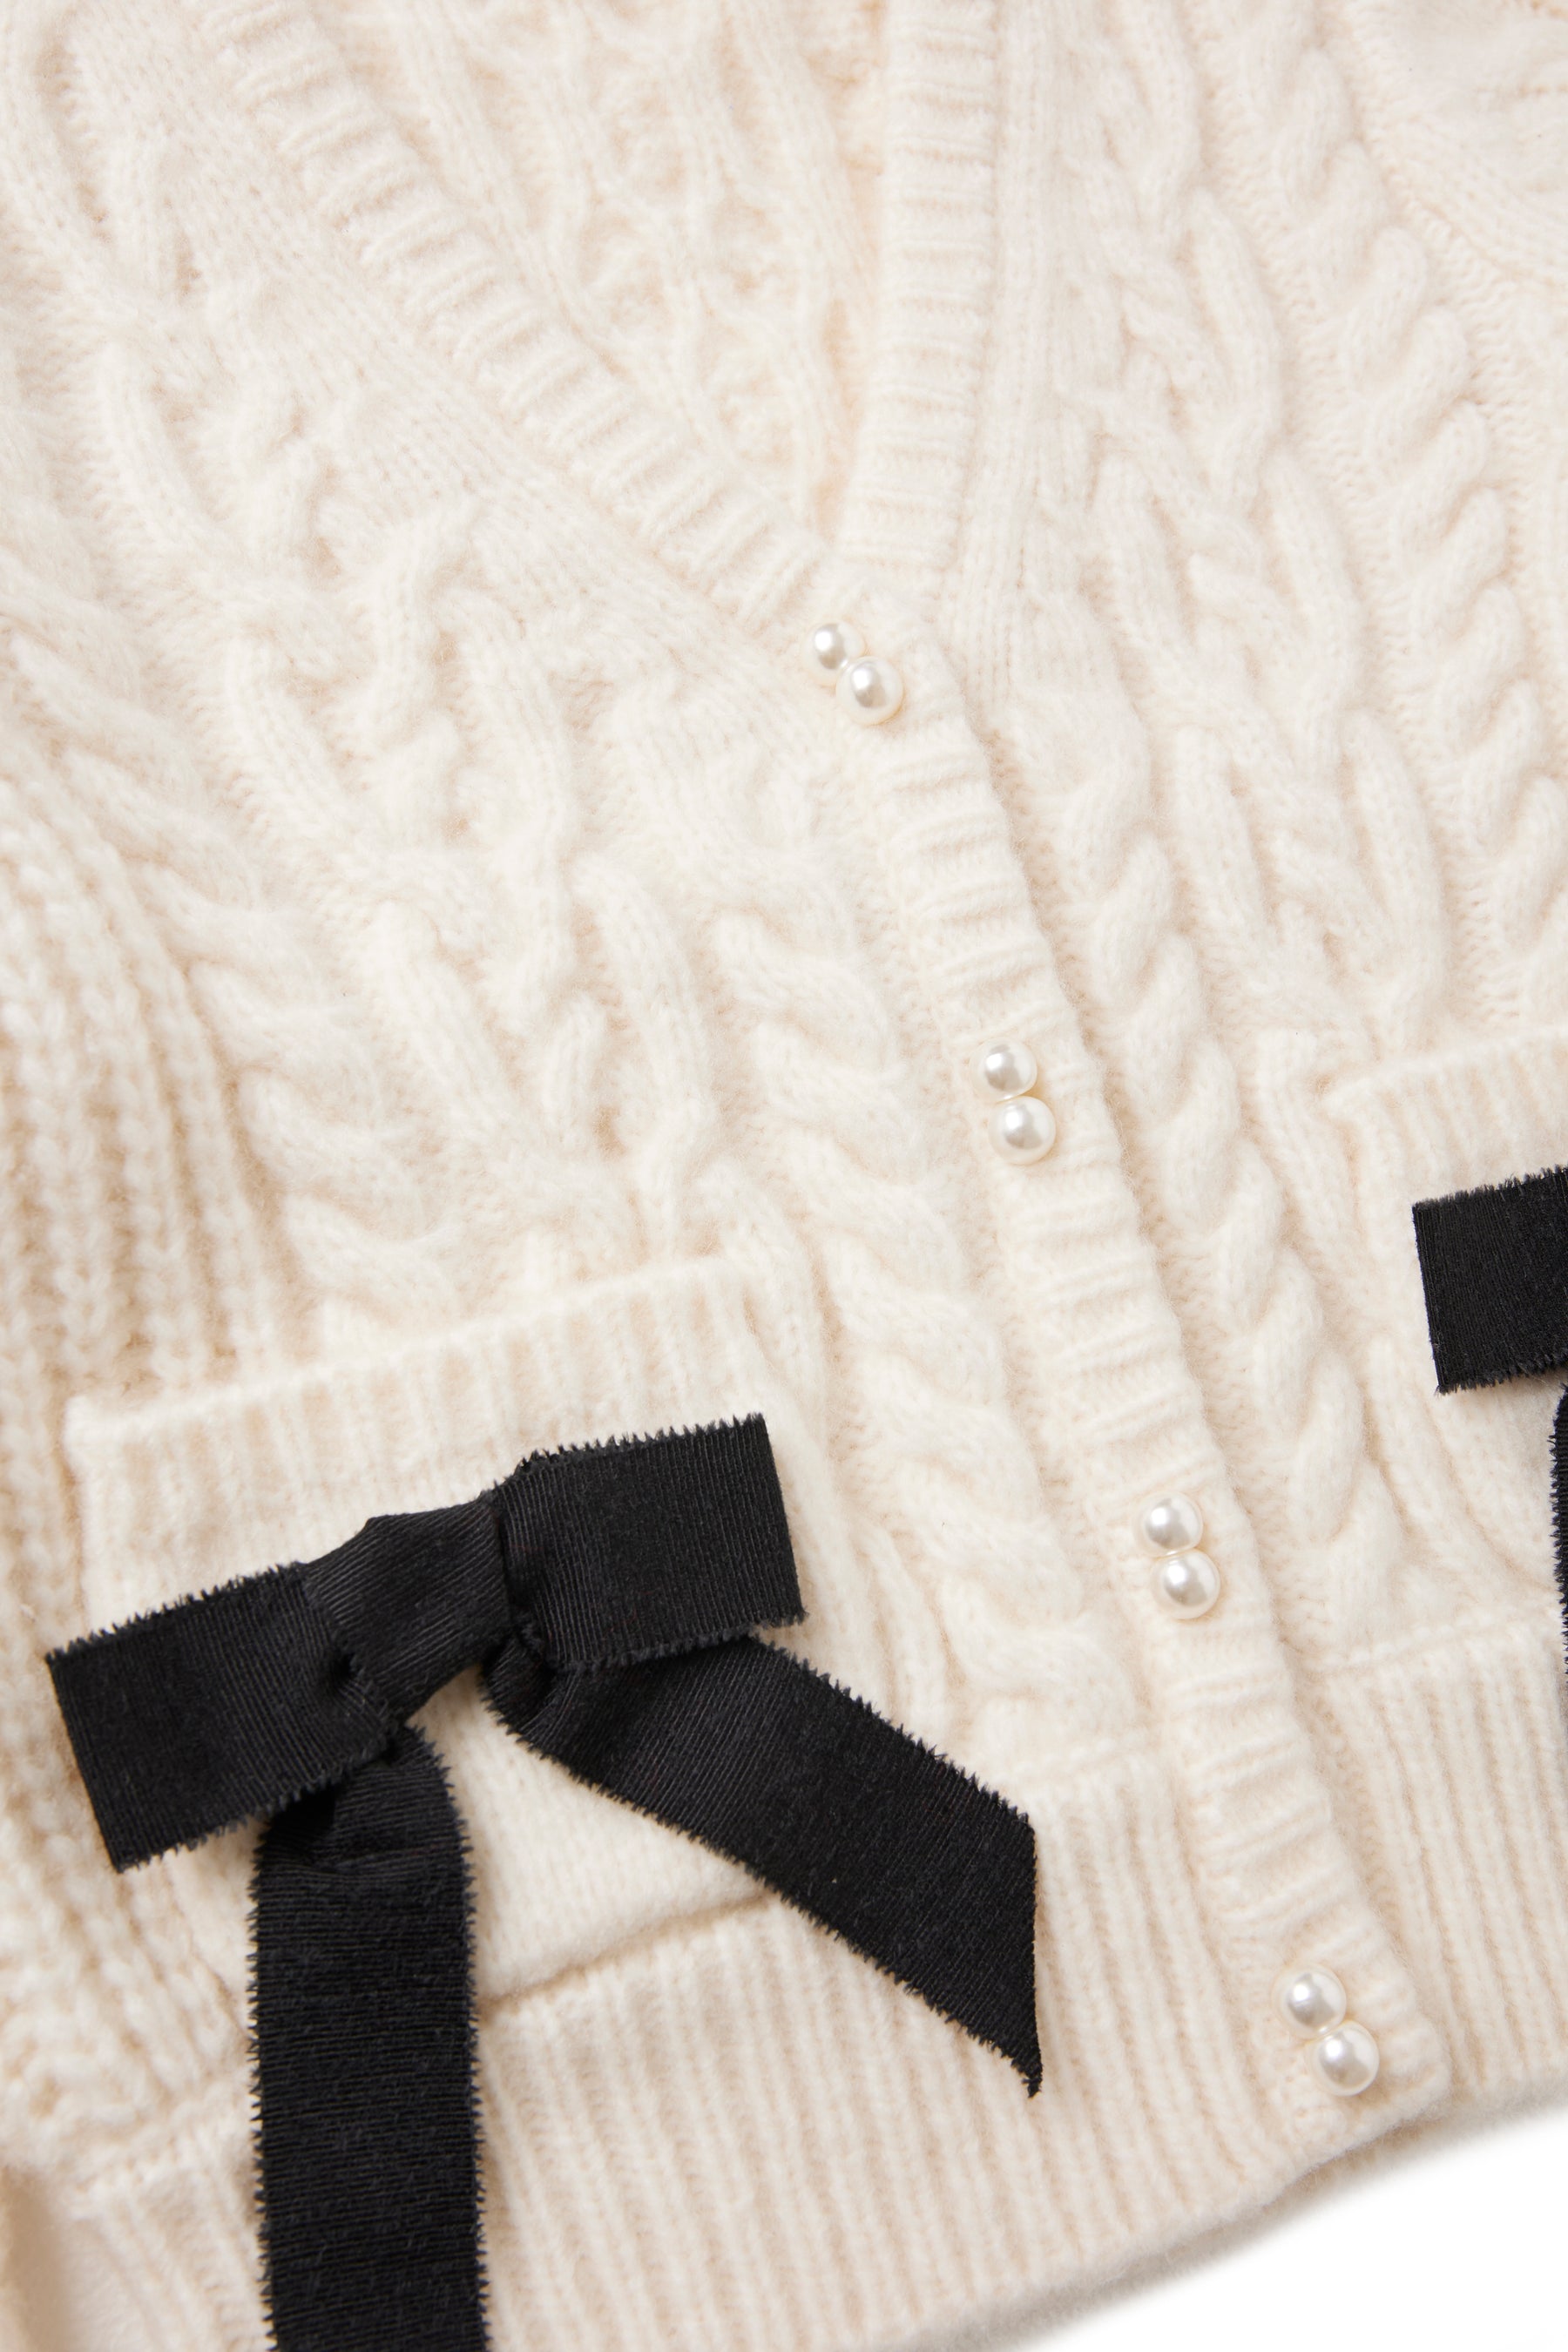 Herlipto Double Bow Cable Knit Cardigan - カーディガン